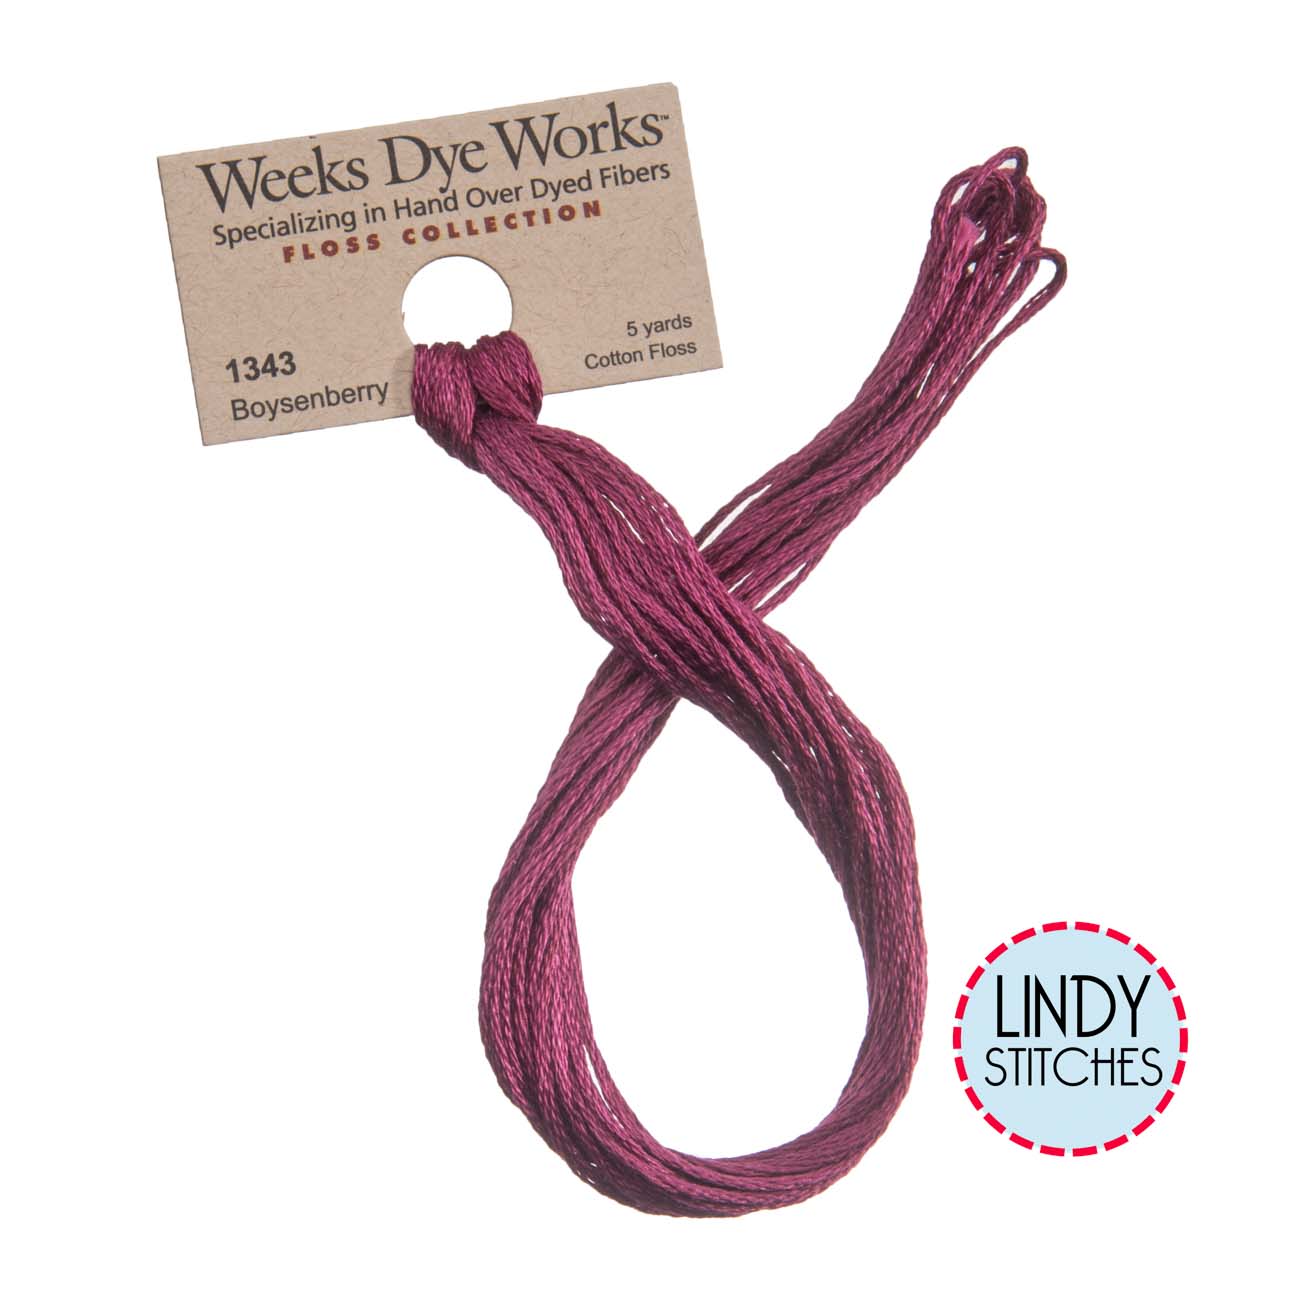 Boysenberry Weeks Dye Works Floss Hand Dyed Cotton Skein 1343